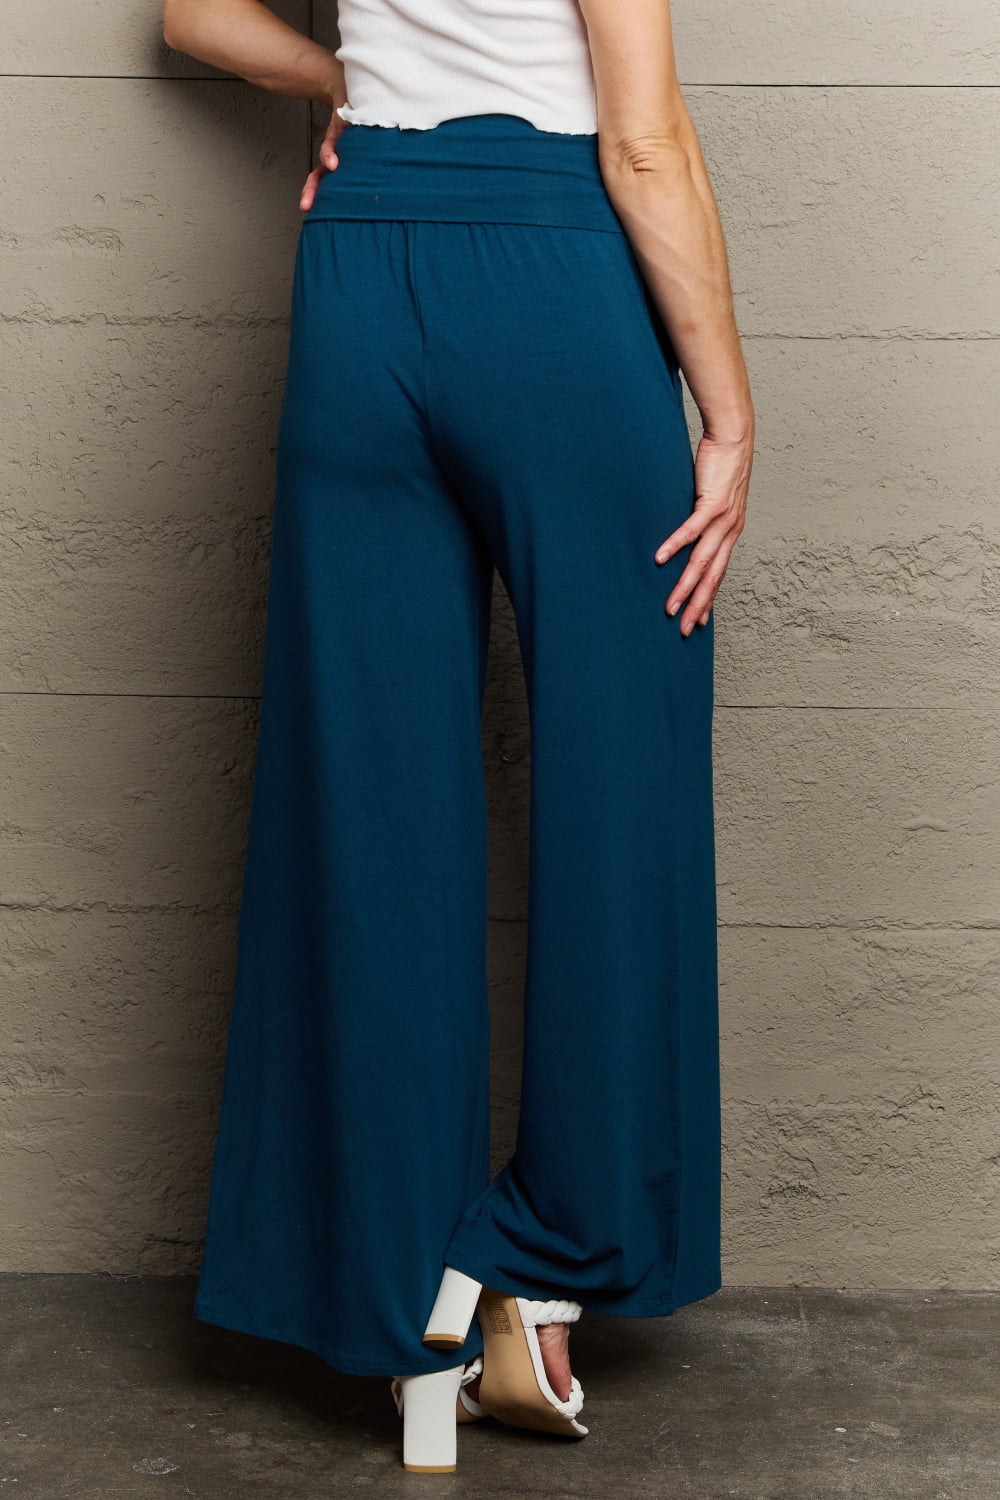 Deep teal palazzo pants with side pockets, back view